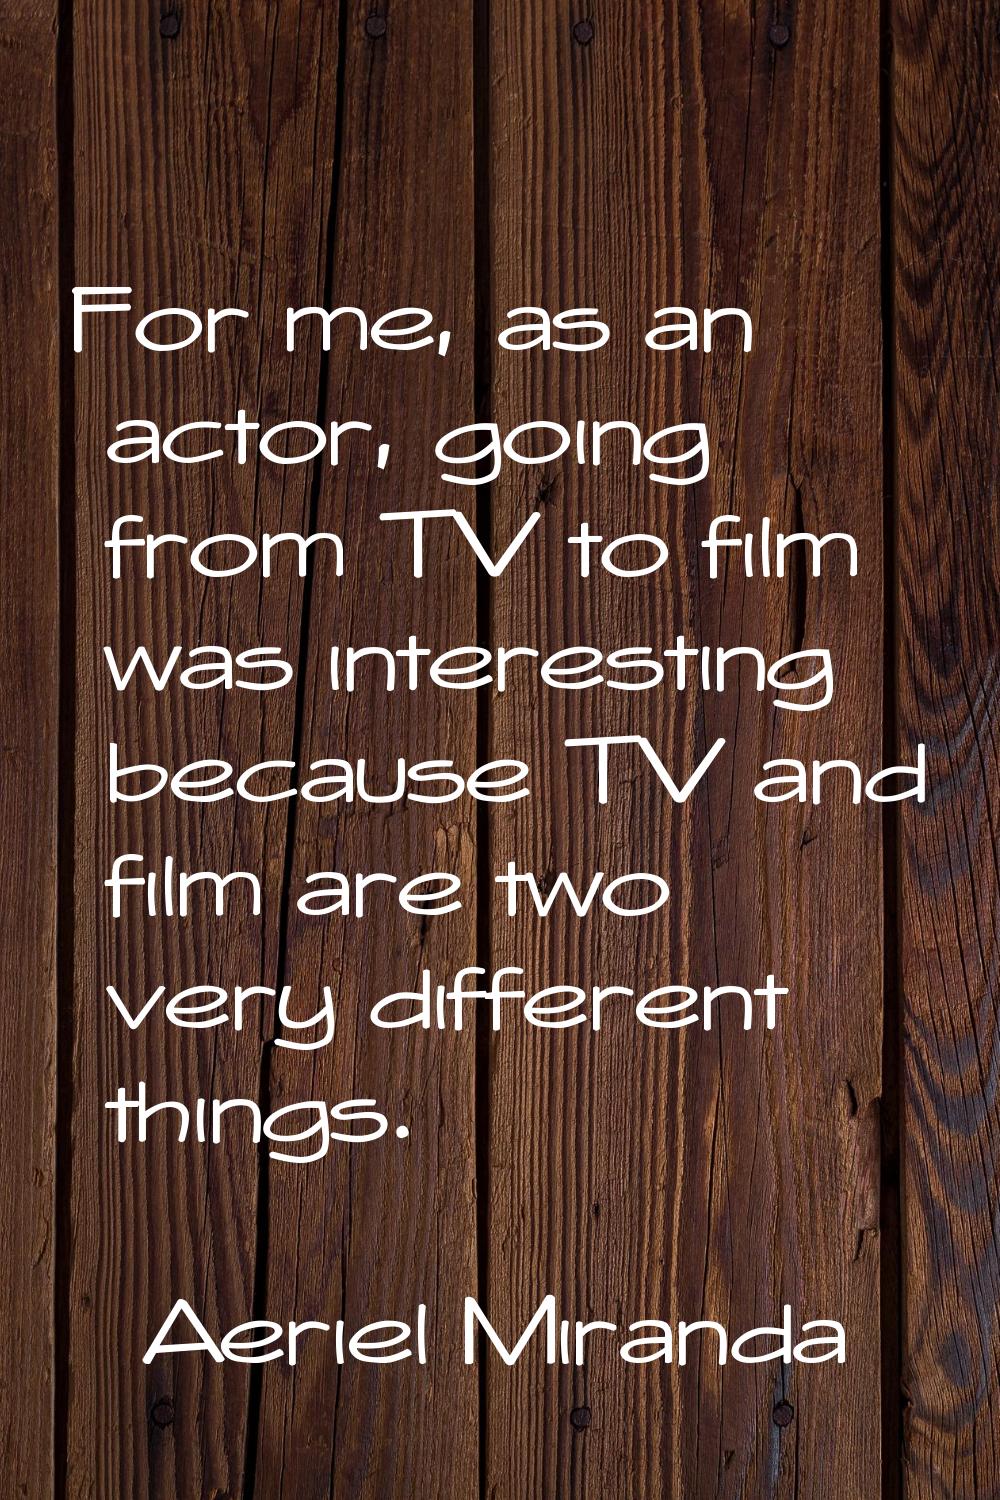 For me, as an actor, going from TV to film was interesting because TV and film are two very differe